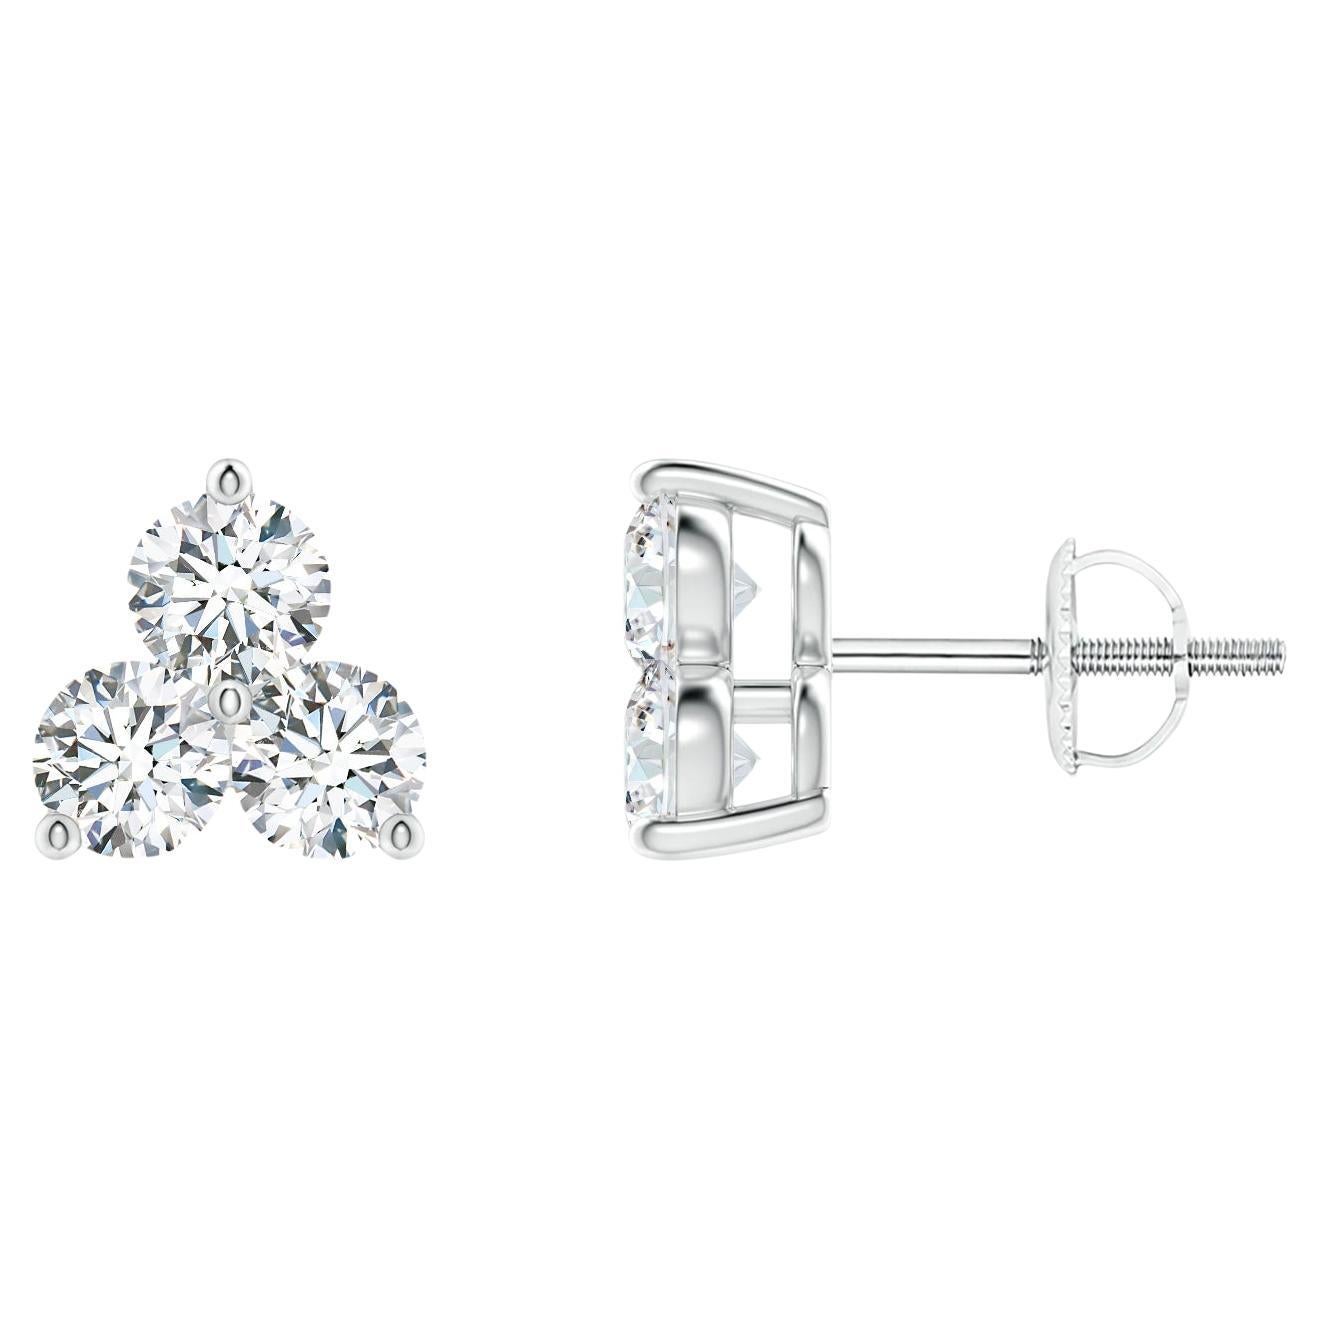 Natural Diamond Stud Earrings in 14K White Gold (0.5cttw  Color-G  Clarity-VS2) For Sale